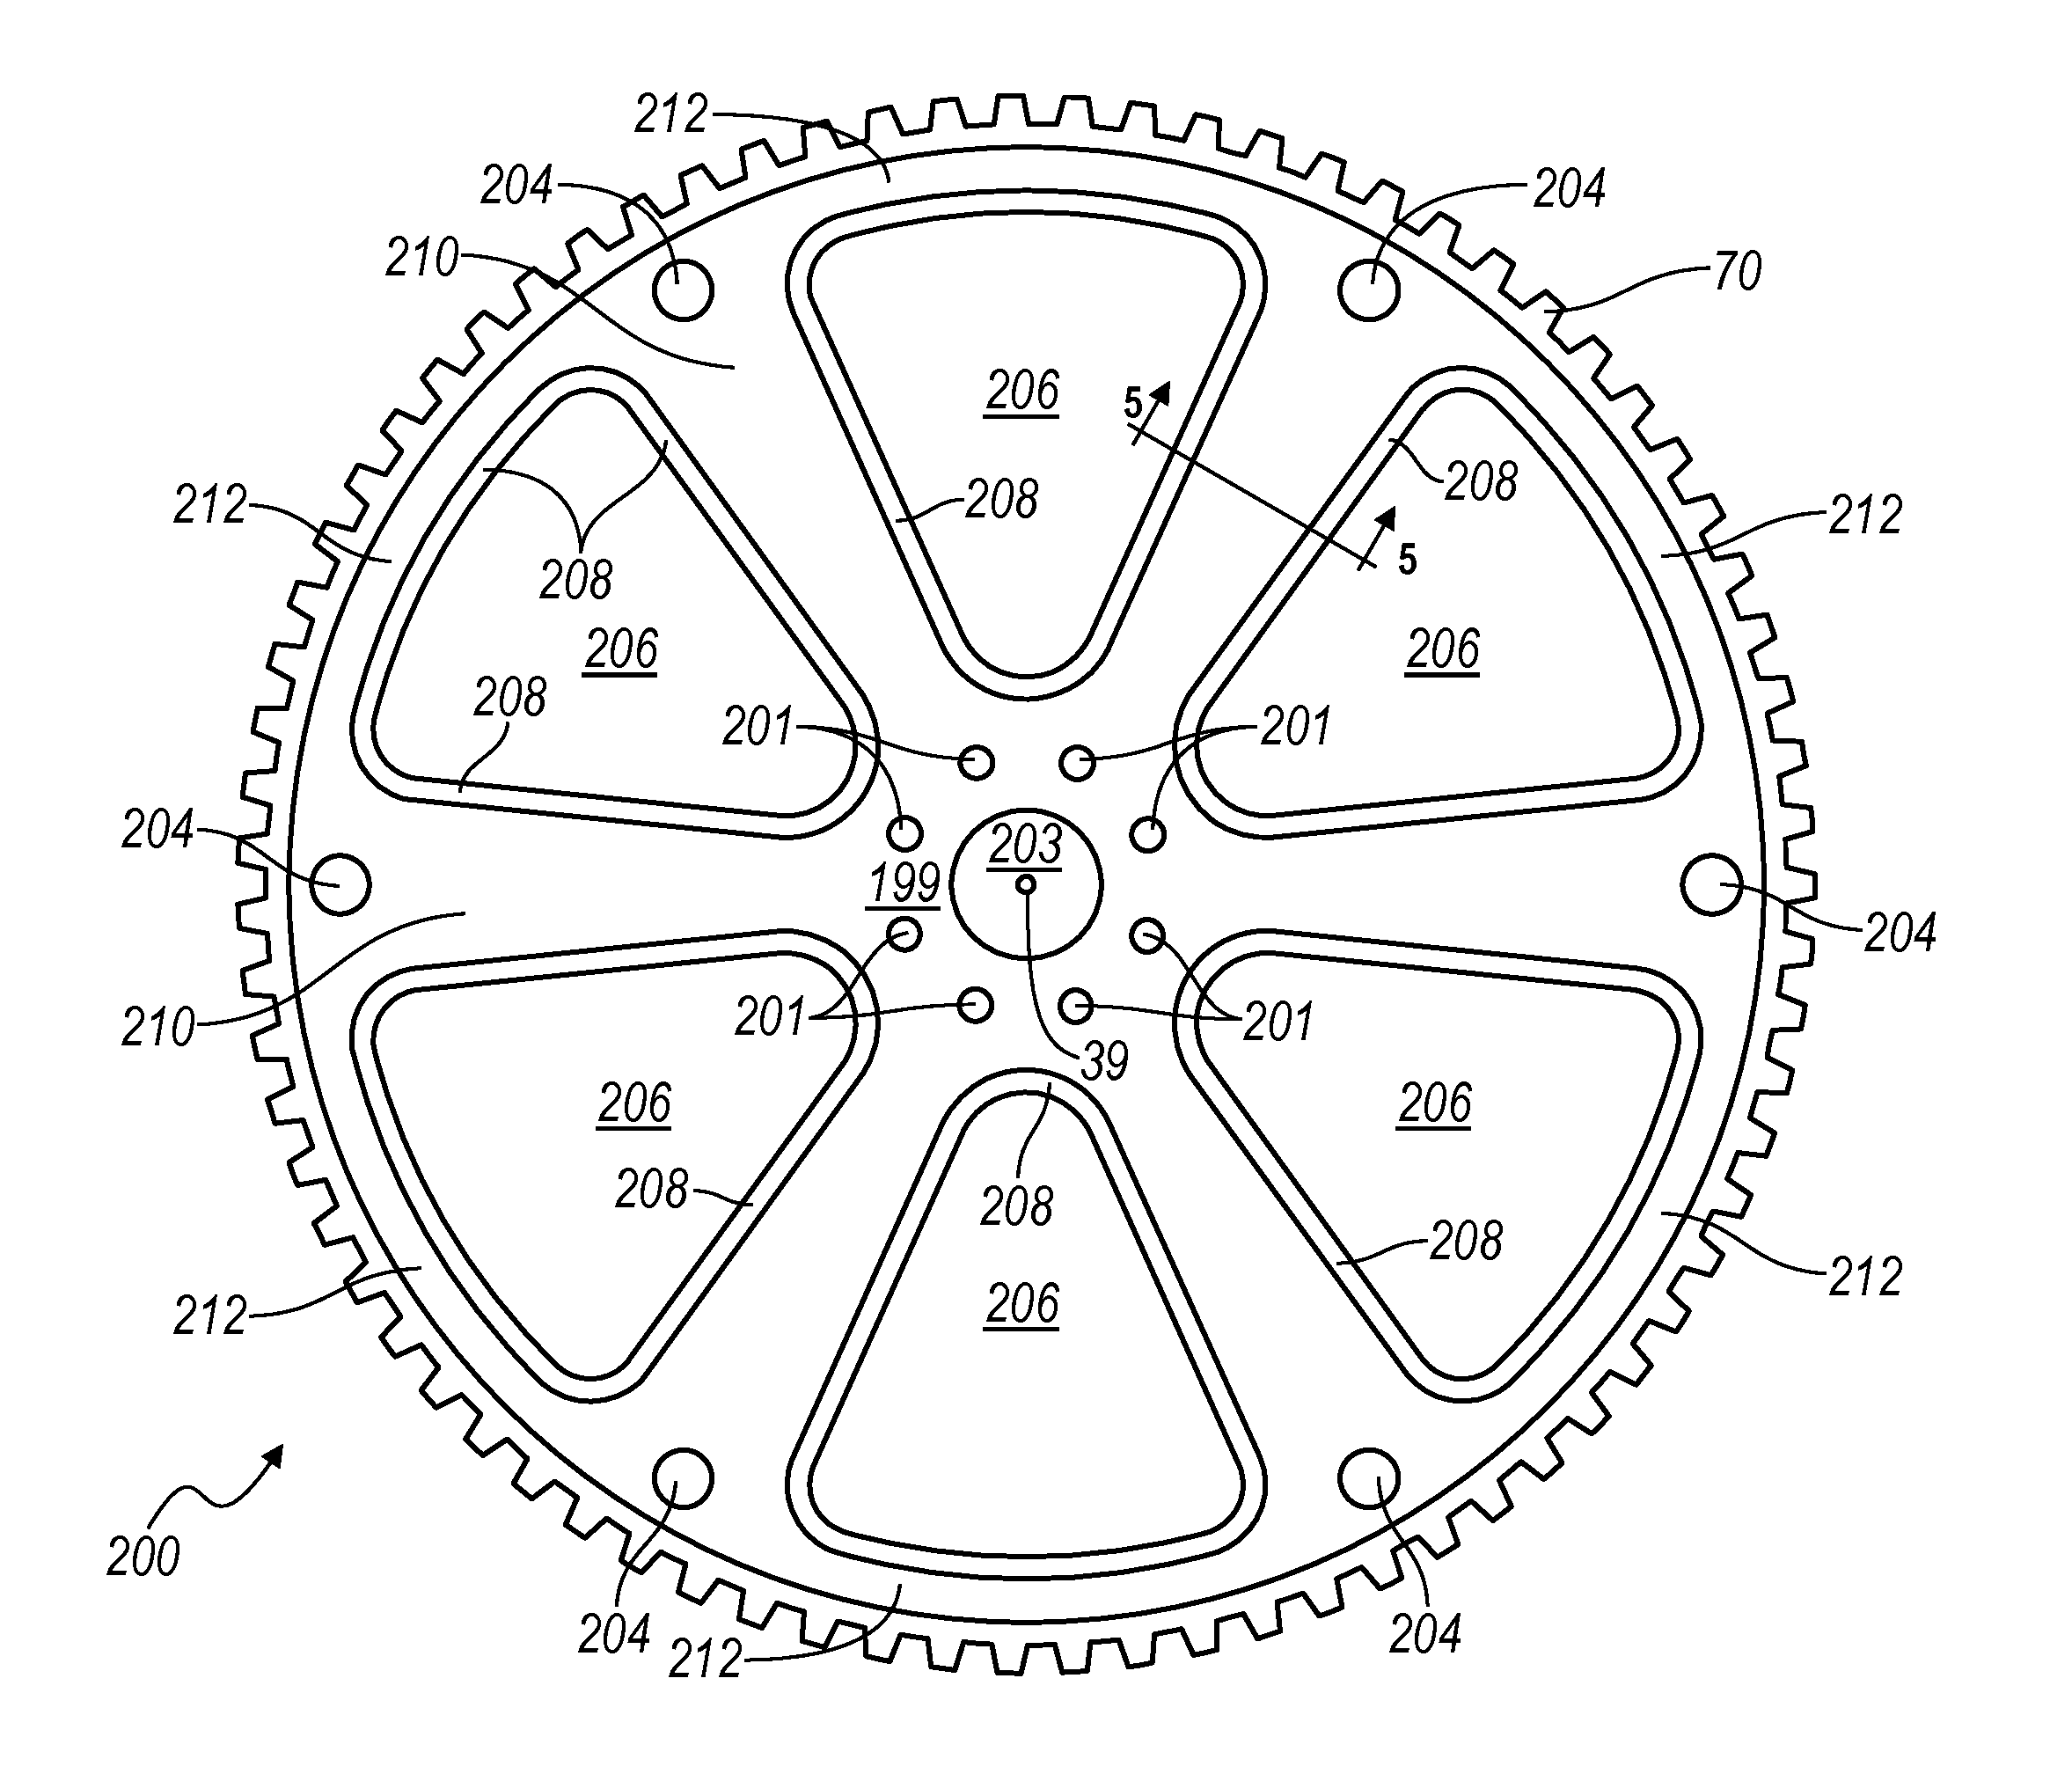 Dual drive plate damper for hybrid electric vehicles